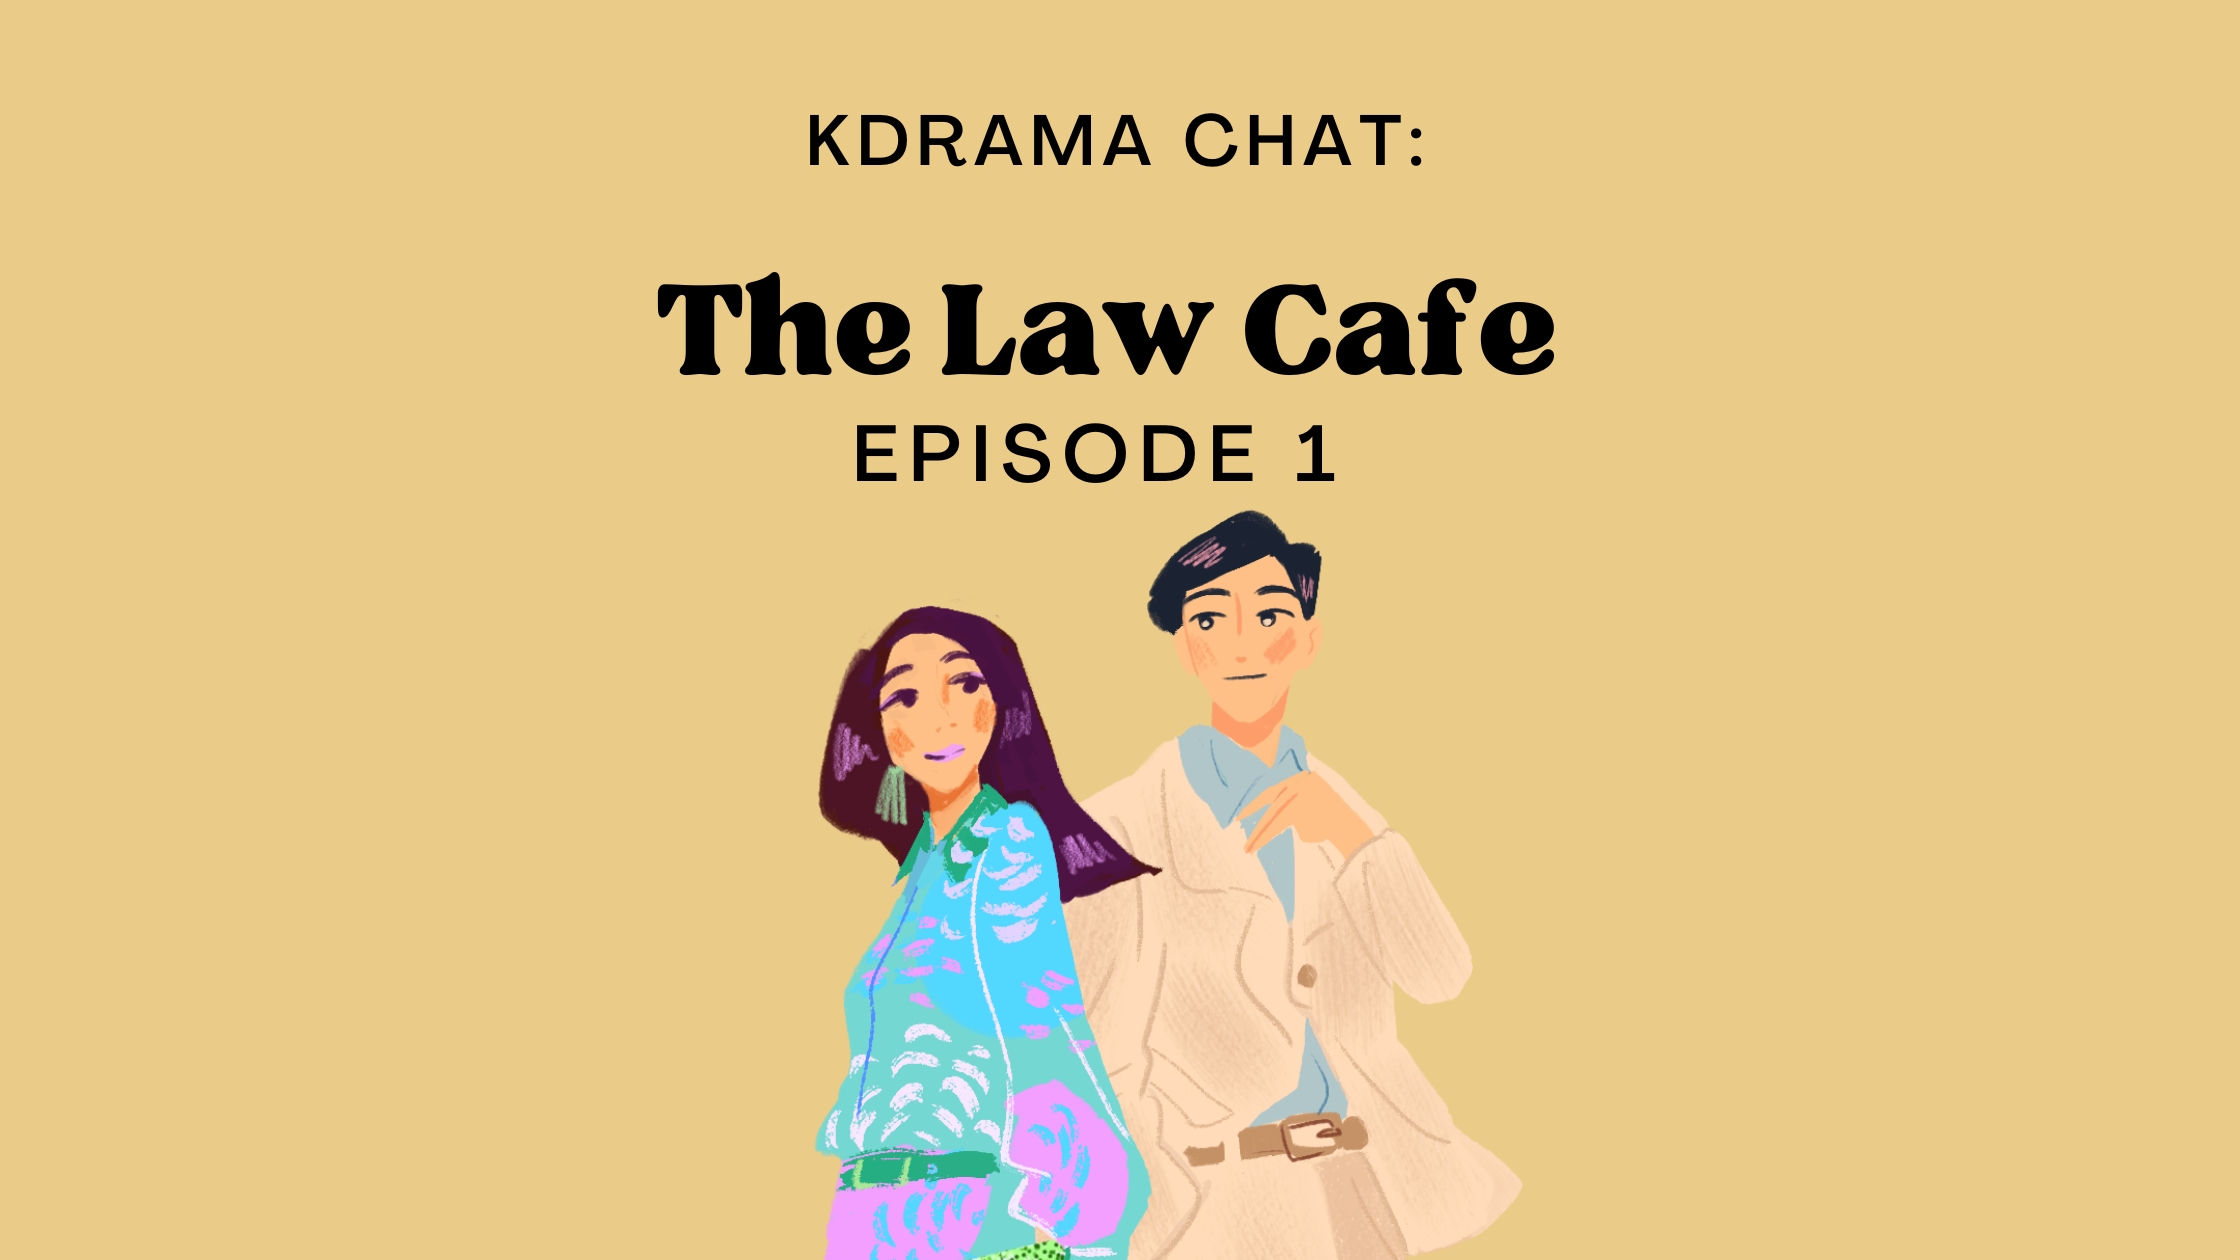 The Law Cafe Episode 1